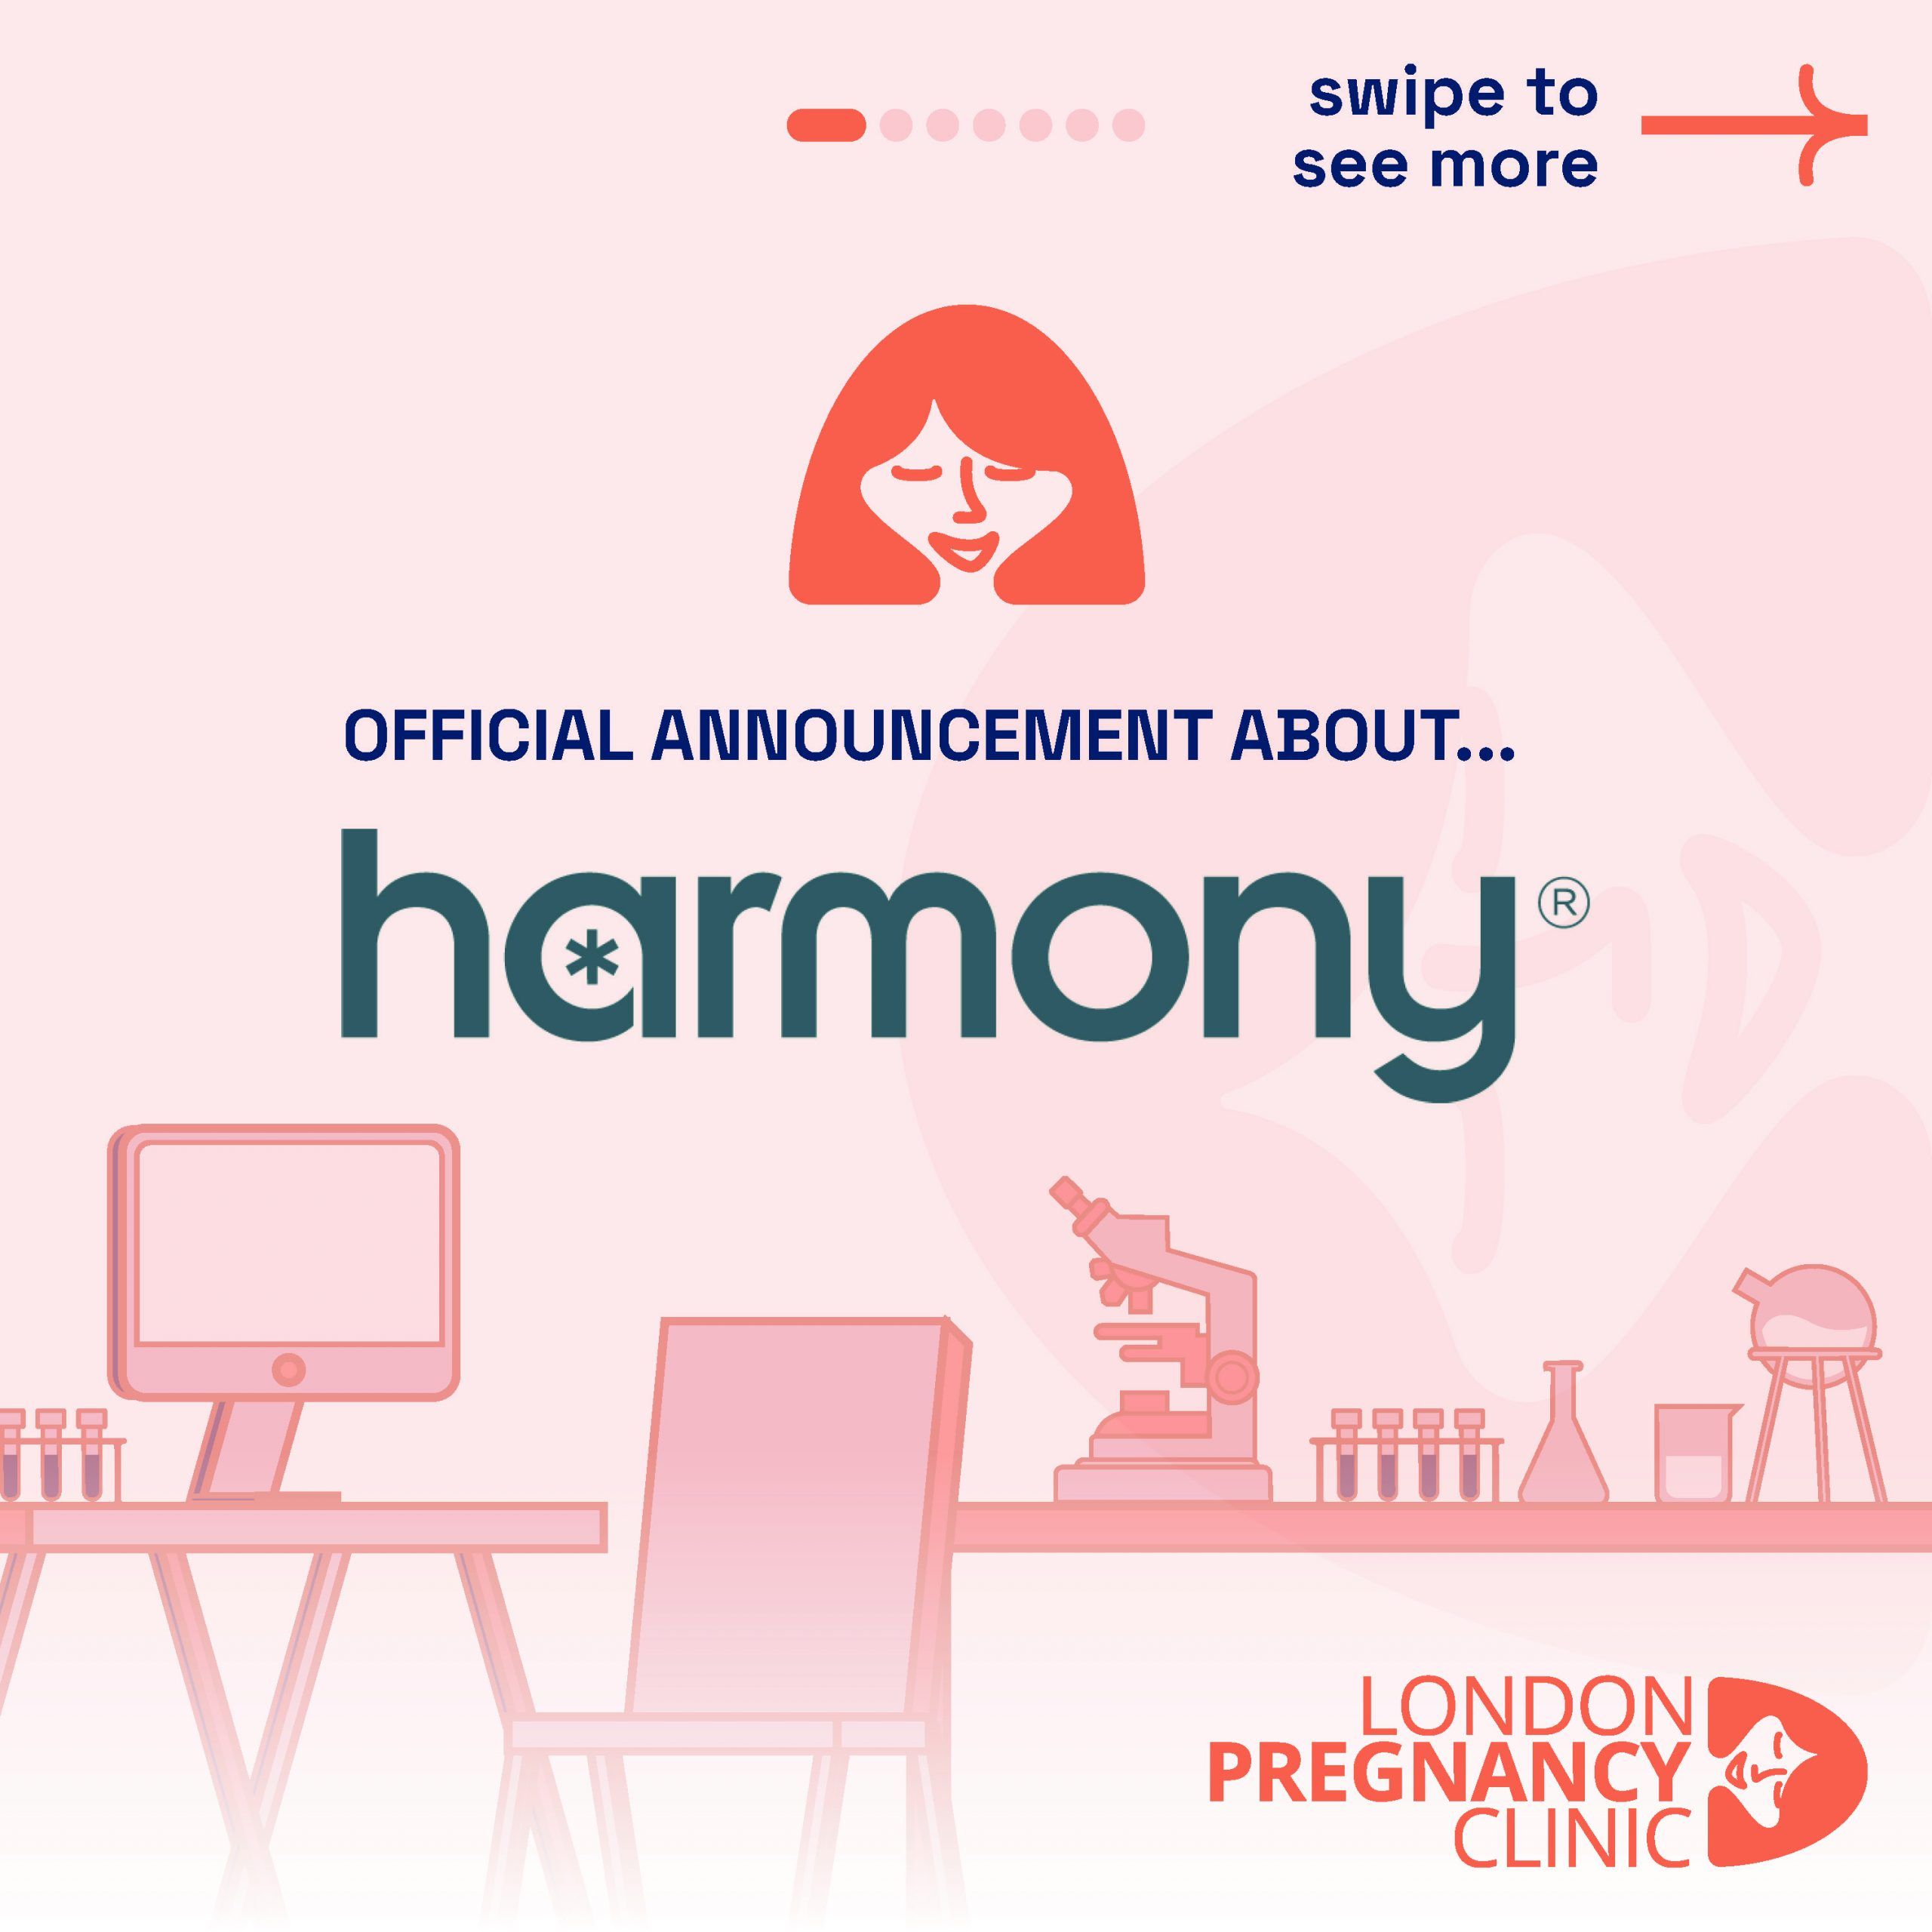 A graphic by London Pregnancy Clinic announcing information about Harmony® NIPT with an illustrated background featuring medical office elements.